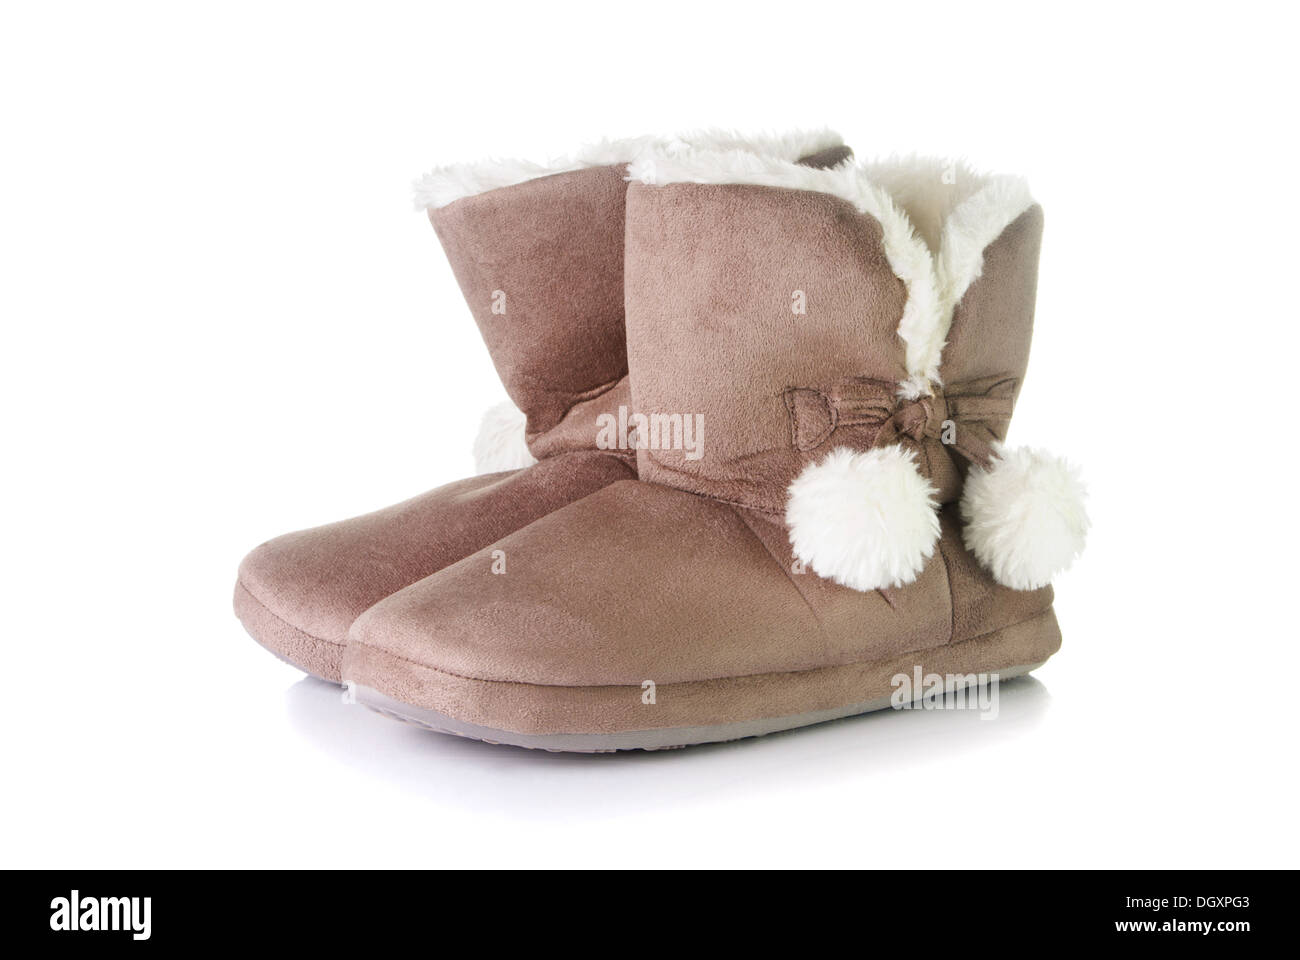 Pair of warm slippers on a white background Stock Photo